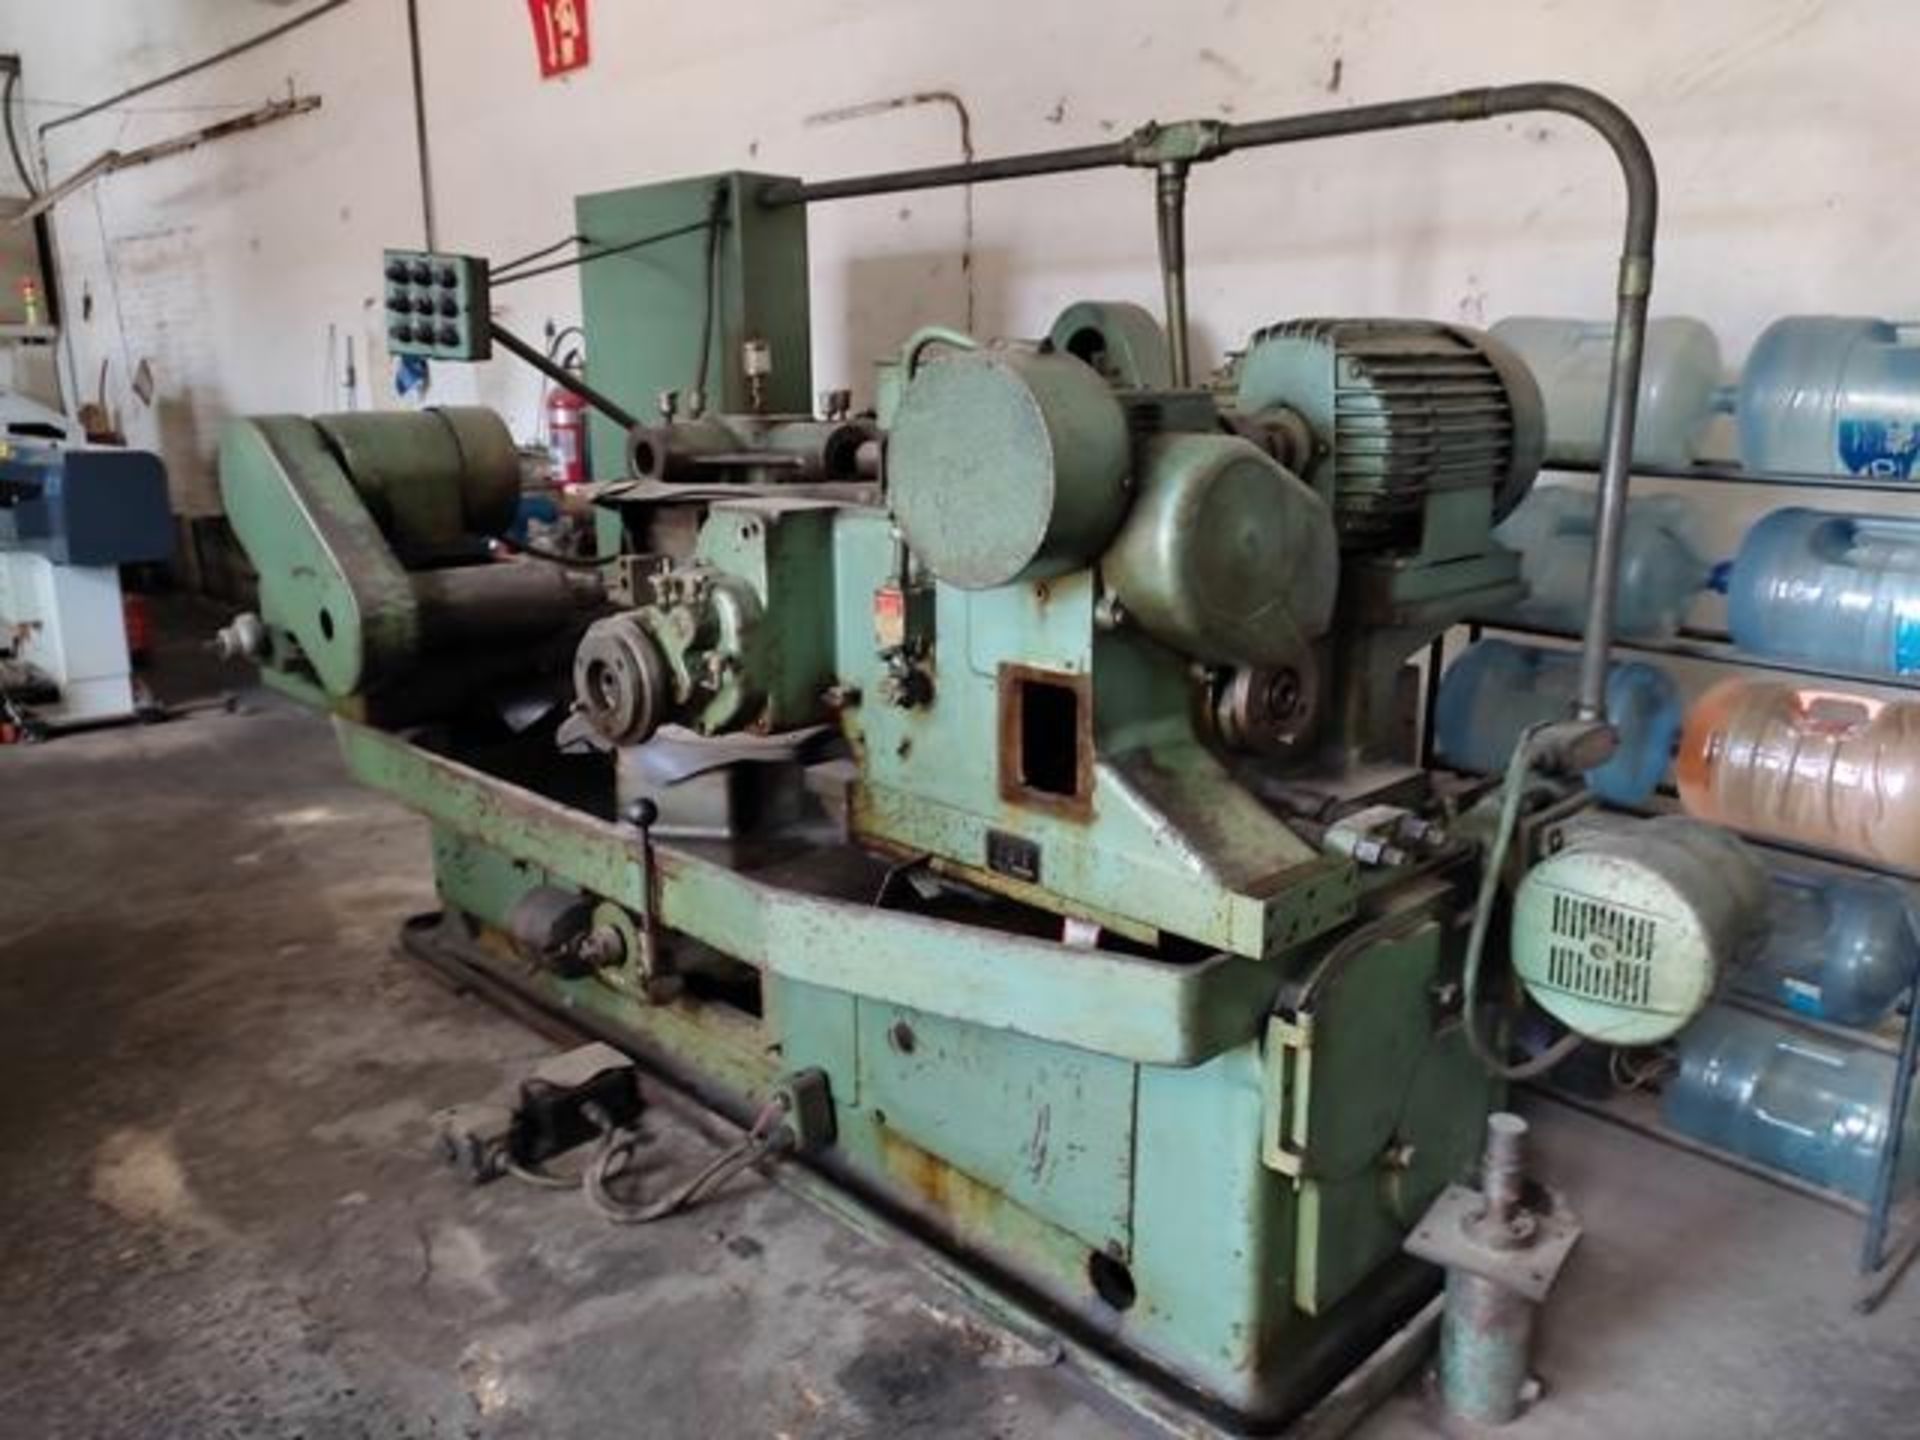 Goss 1-2-3 Chucking Machine, Serial: 2317: 7 Spindle, 3-1/2” Diameter, 4 Chucking Positions with - Image 12 of 26